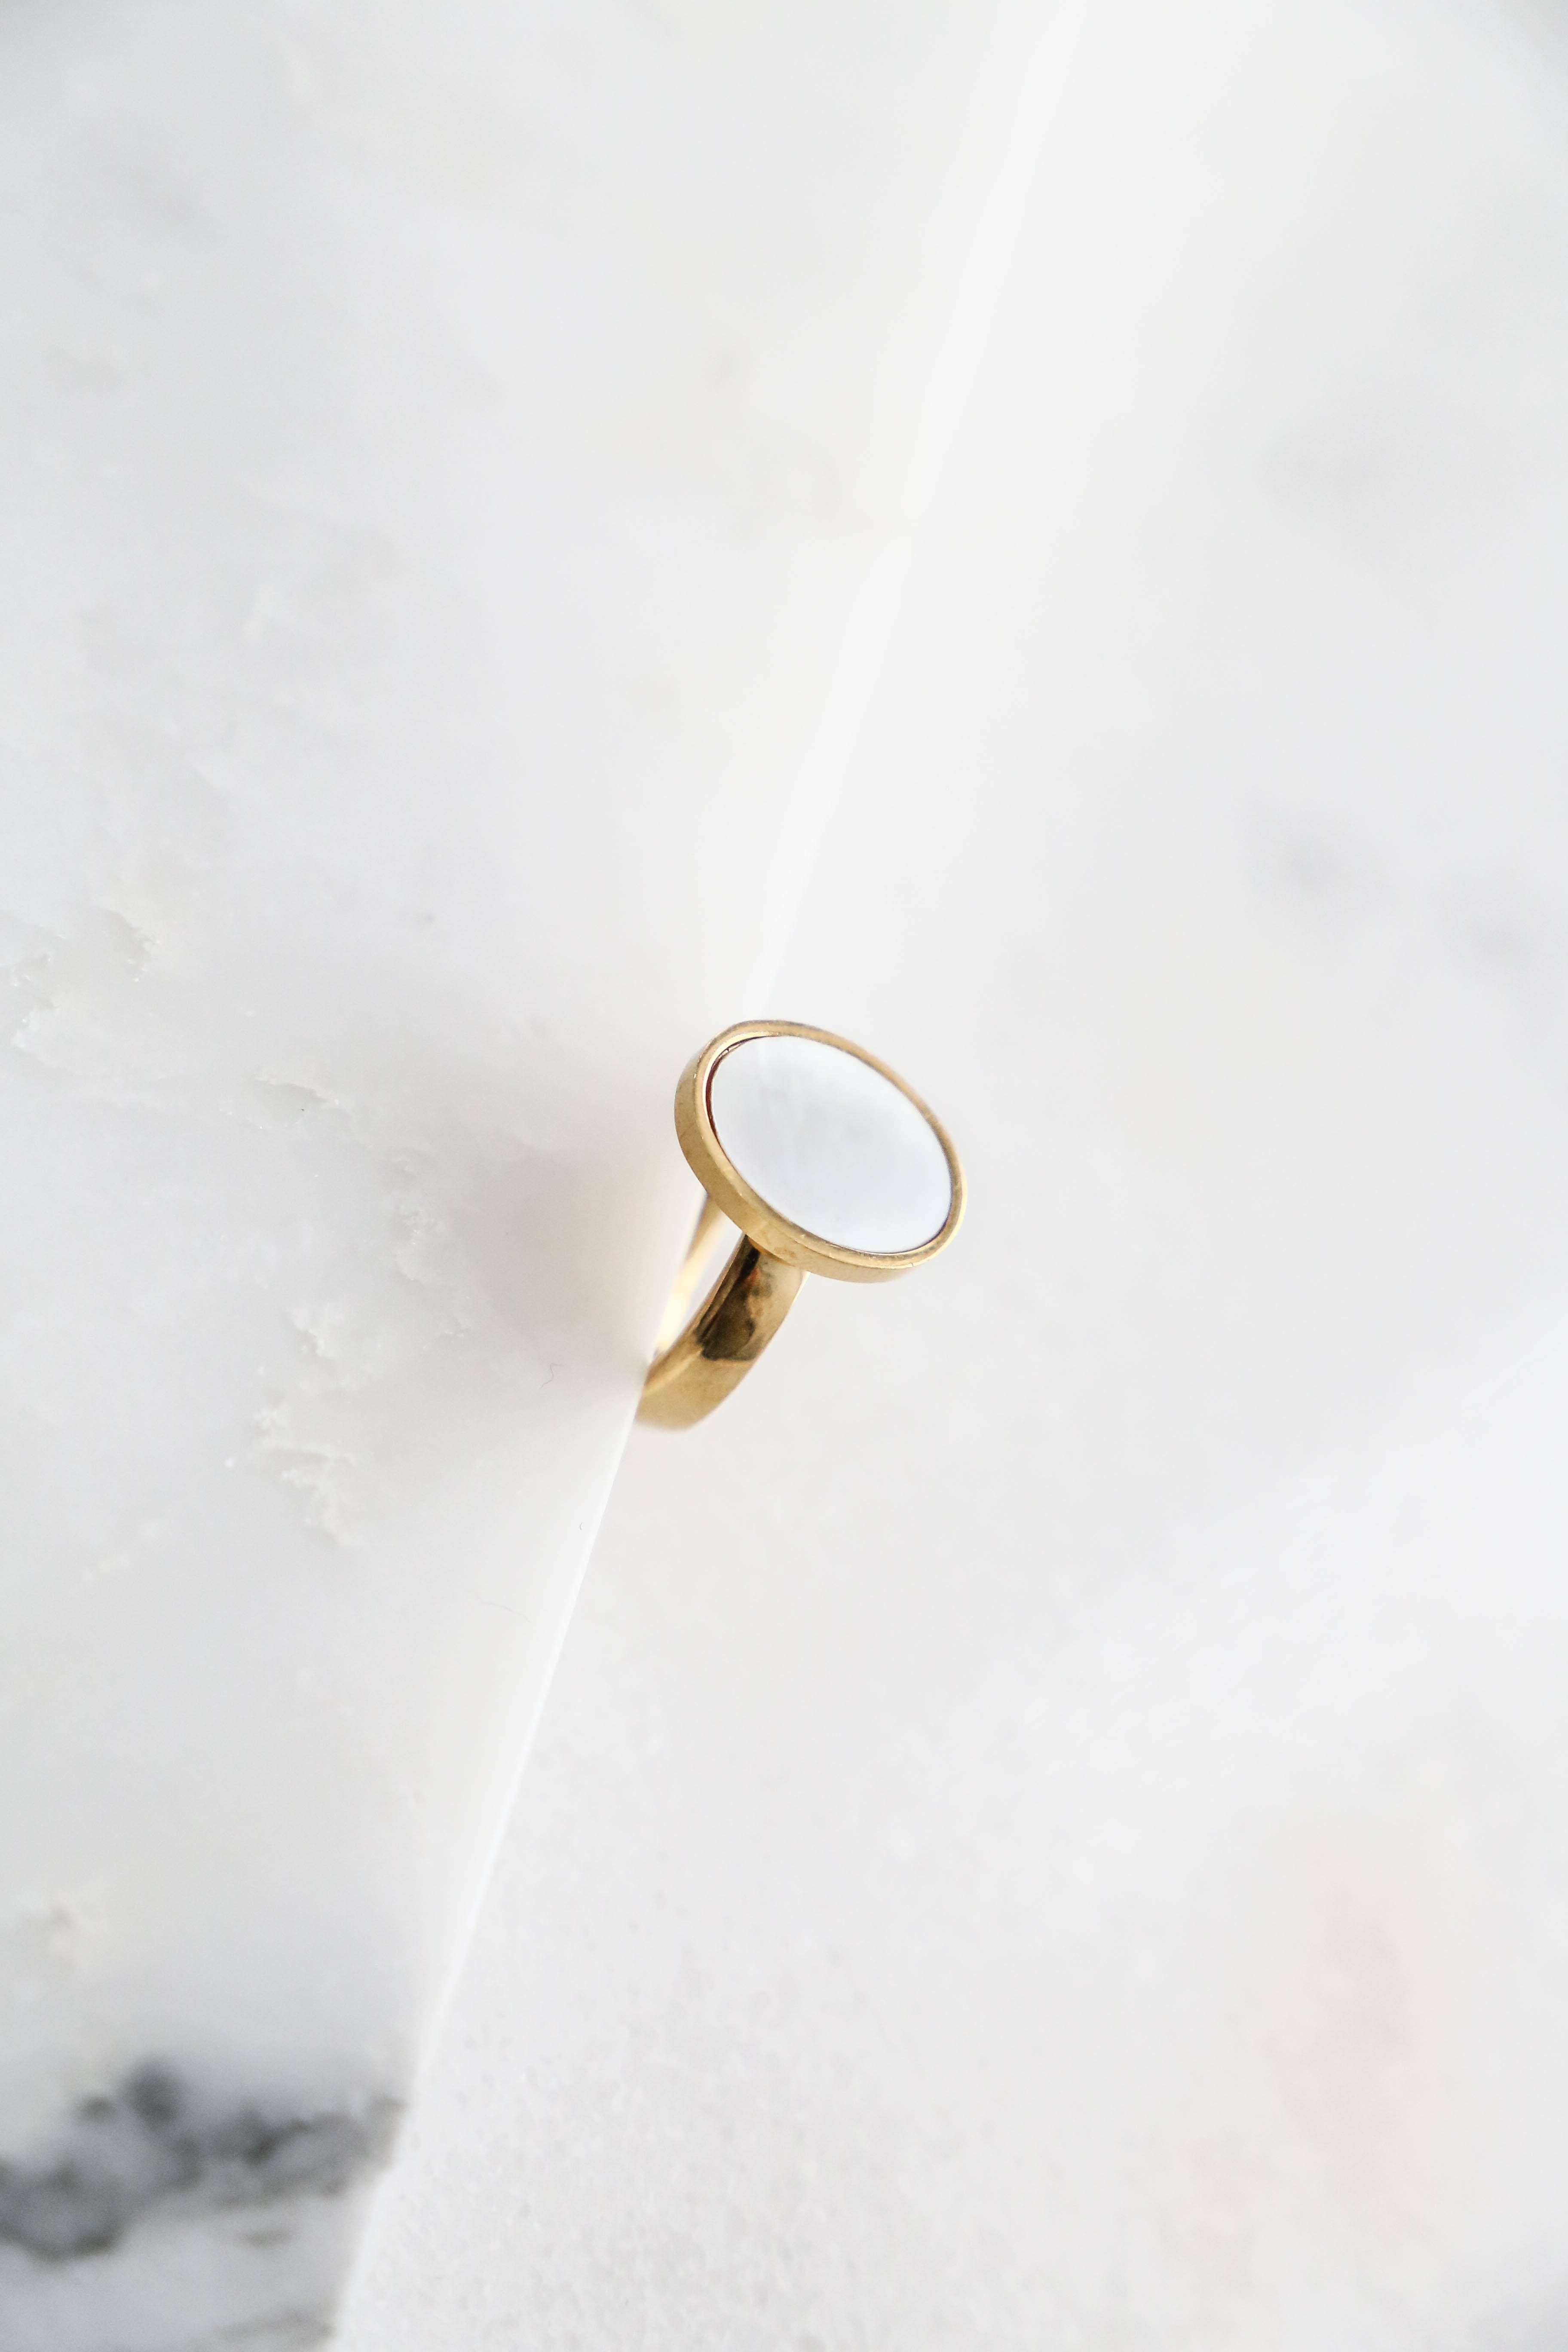 Charlotte Ring - Boutique Minimaliste has waterproof, durable, elegant and vintage inspired jewelry